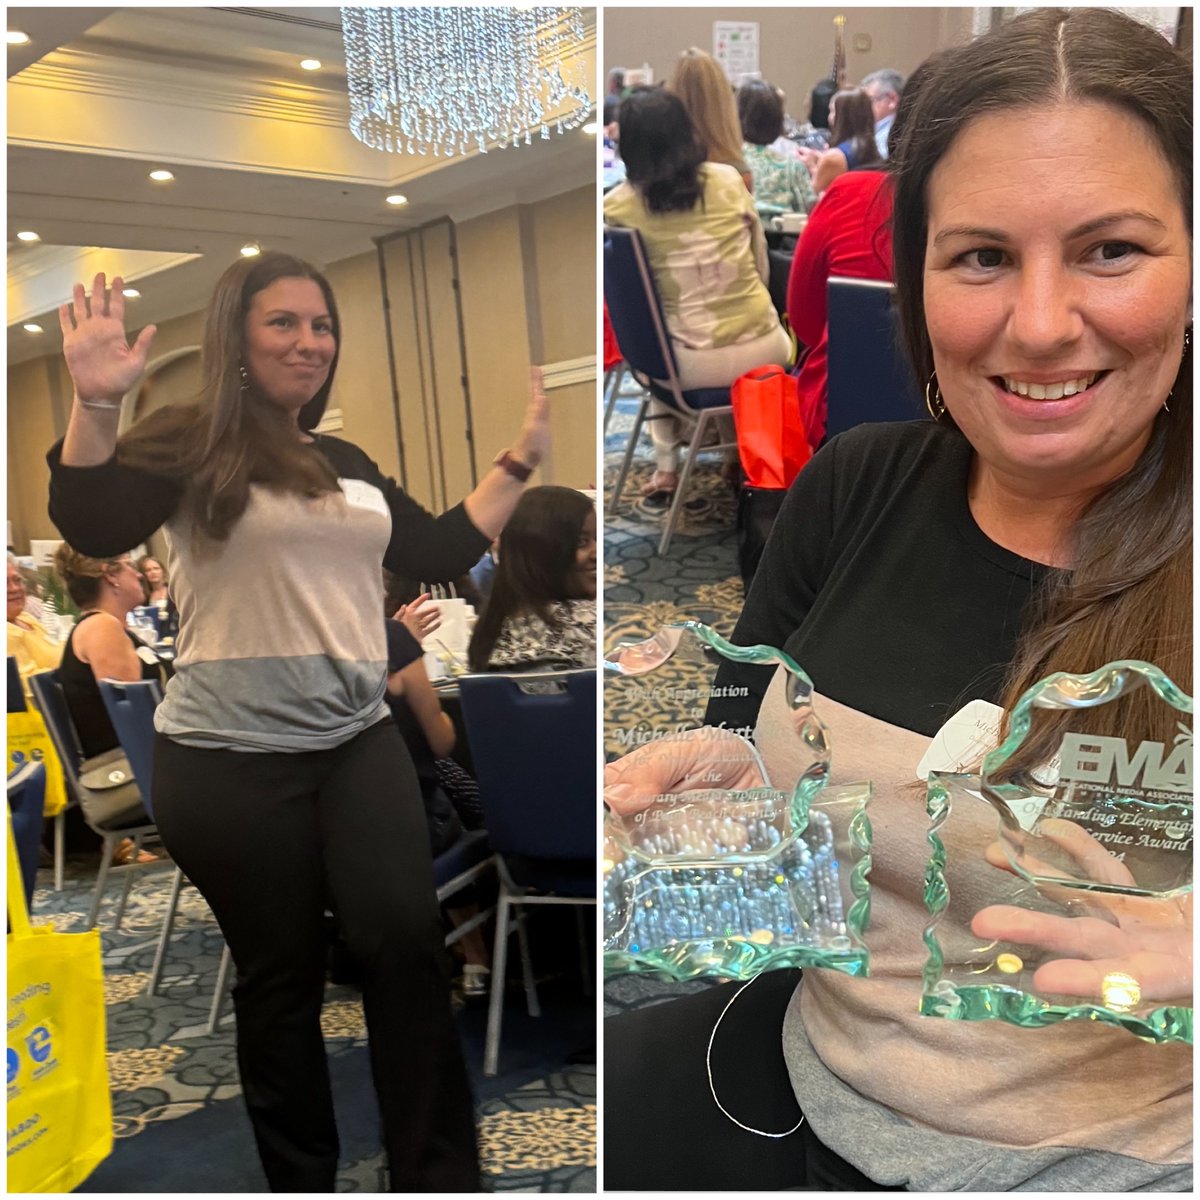 Congratulations @msmartello2 for being recognized as Media Specialist of the Year! You are so deserving of this honor. Thank you for making the library the ❤️ of our school! You go above and beyond for the DVE students and staff! Amazing Work! 🤩 @DVESPrincipal @emapbc @pbcsd